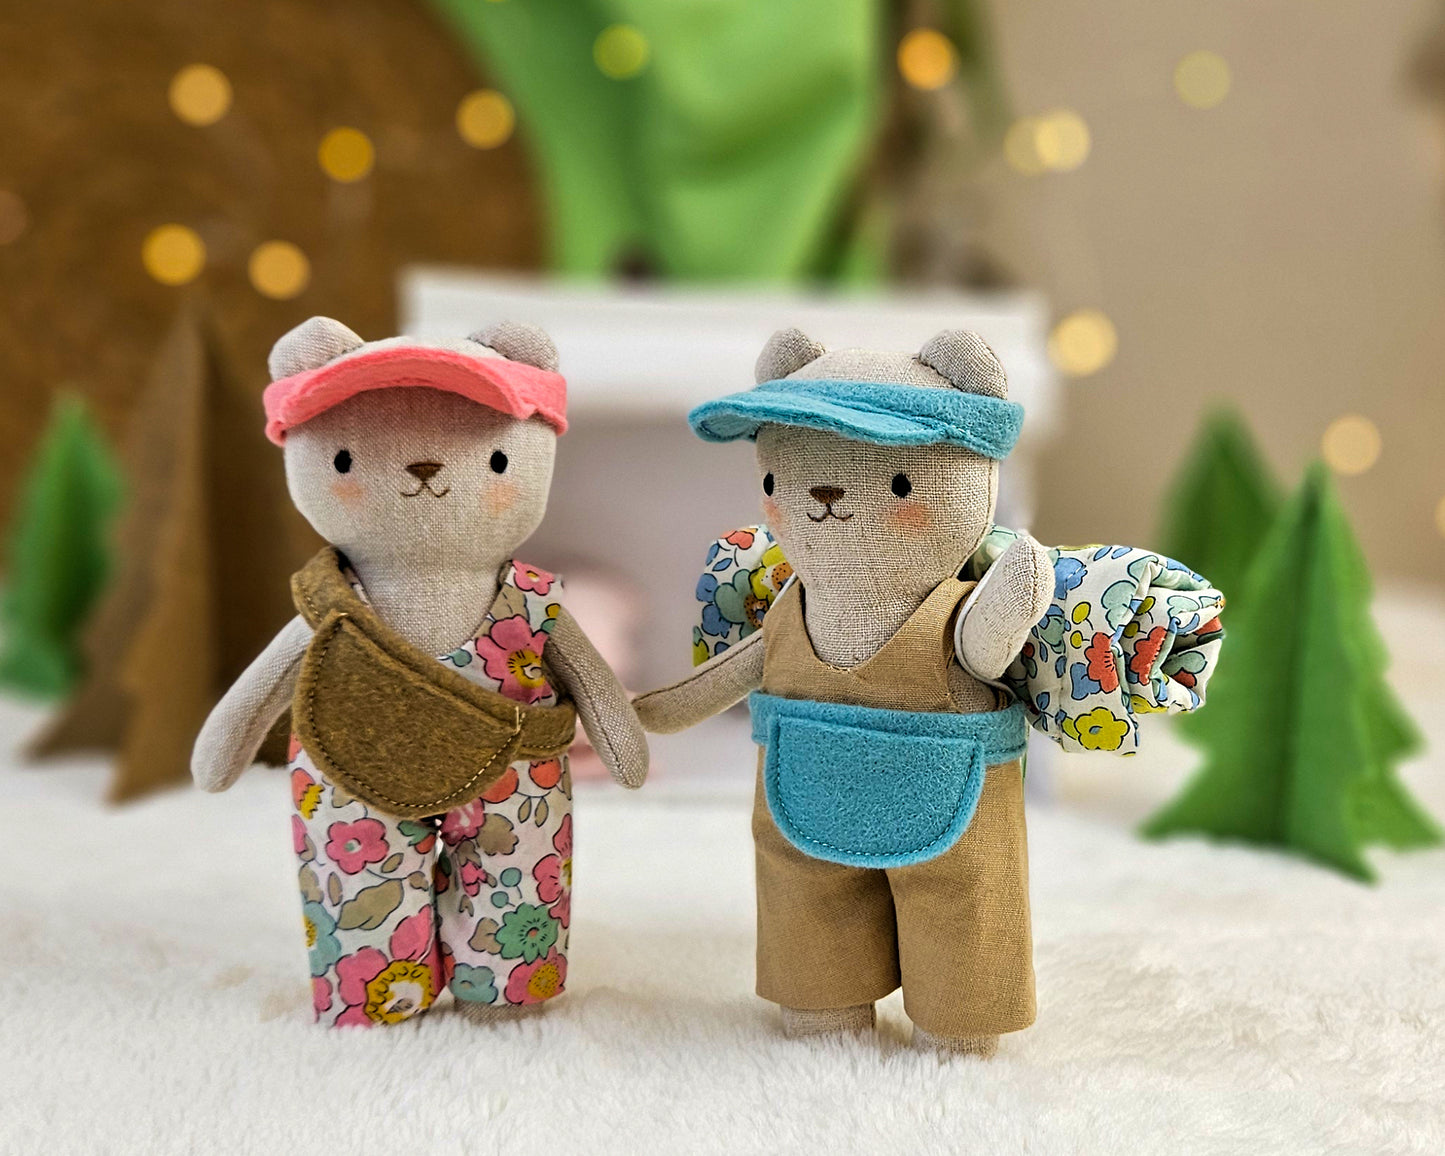 Mini Bear Doll and camping set - PDF sewing pattern and tutorial